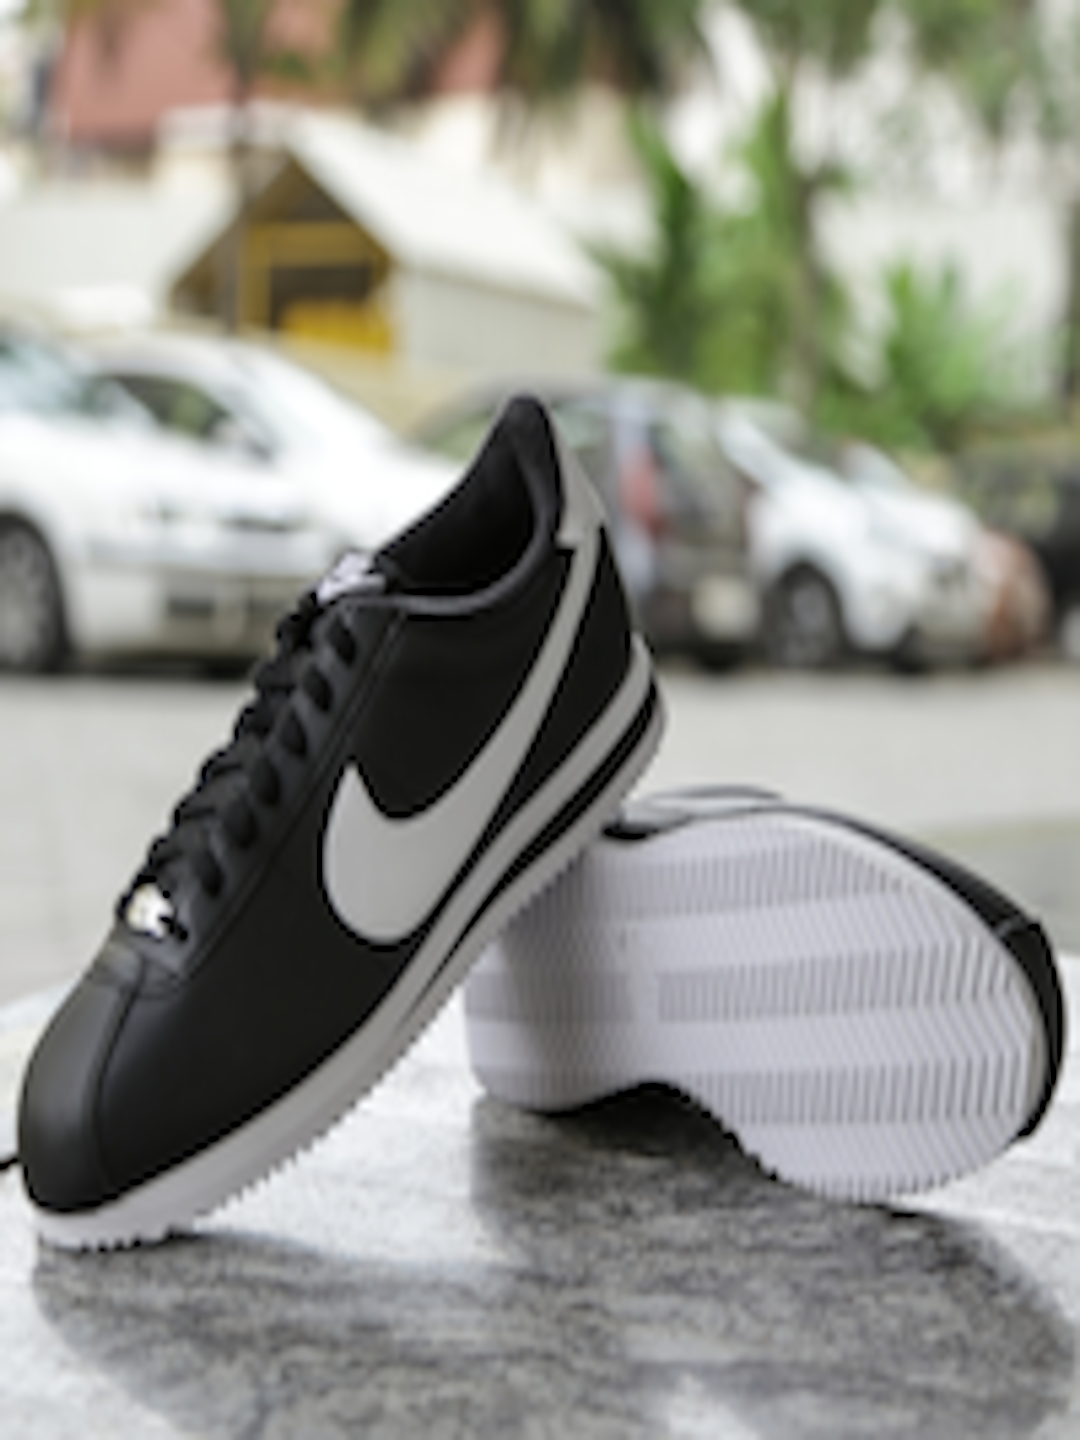 nike leather sneakers